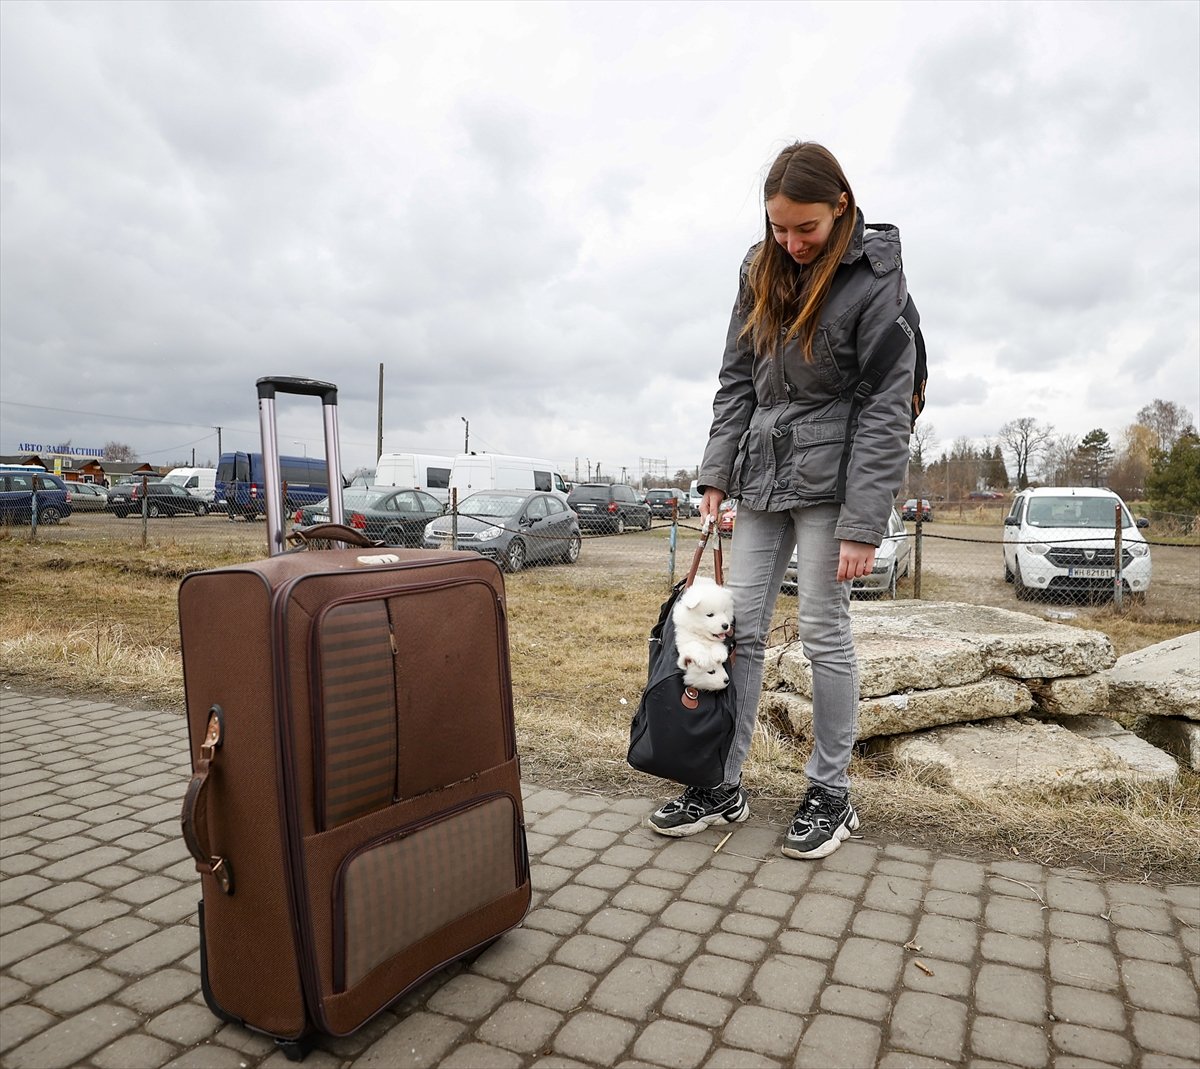 UN: 1 million 368 thousand 864 refugees crossed from Ukraine to neighboring countries #2